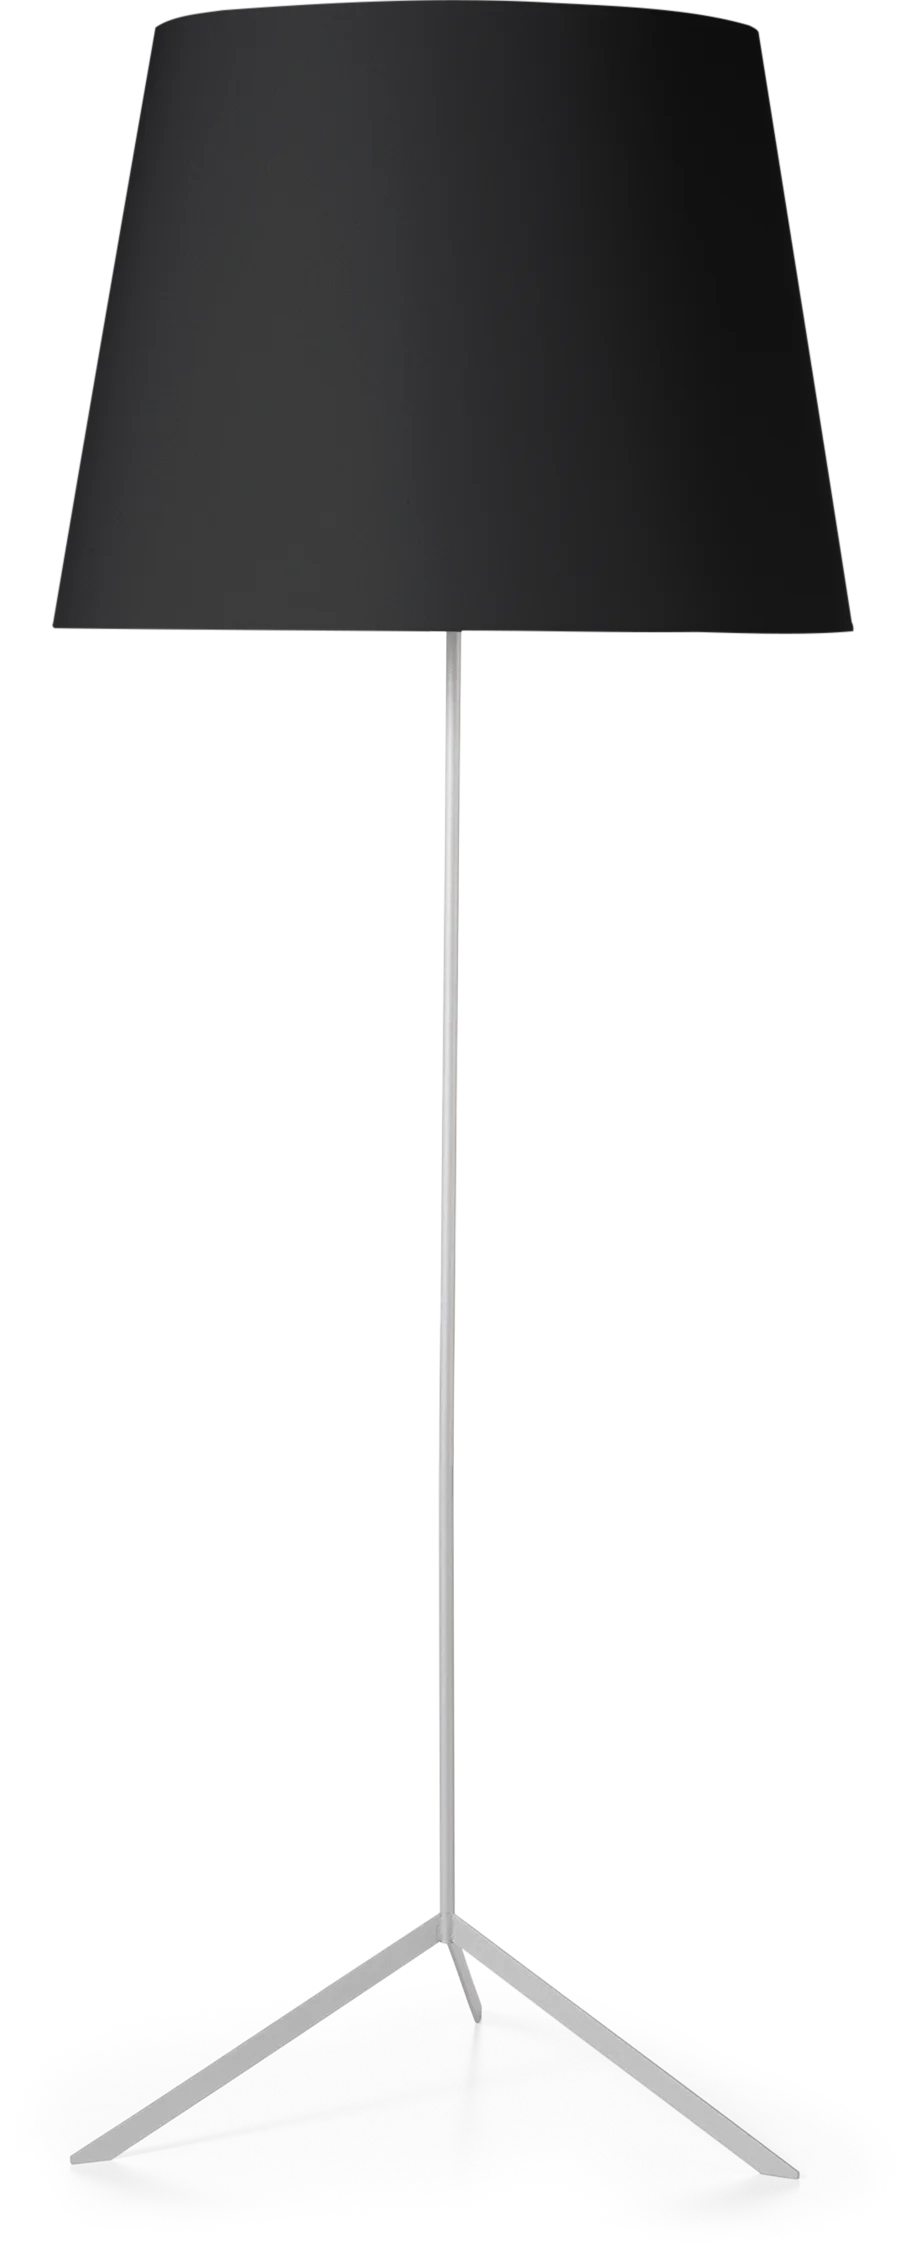 Double Shade floor lamp black front view